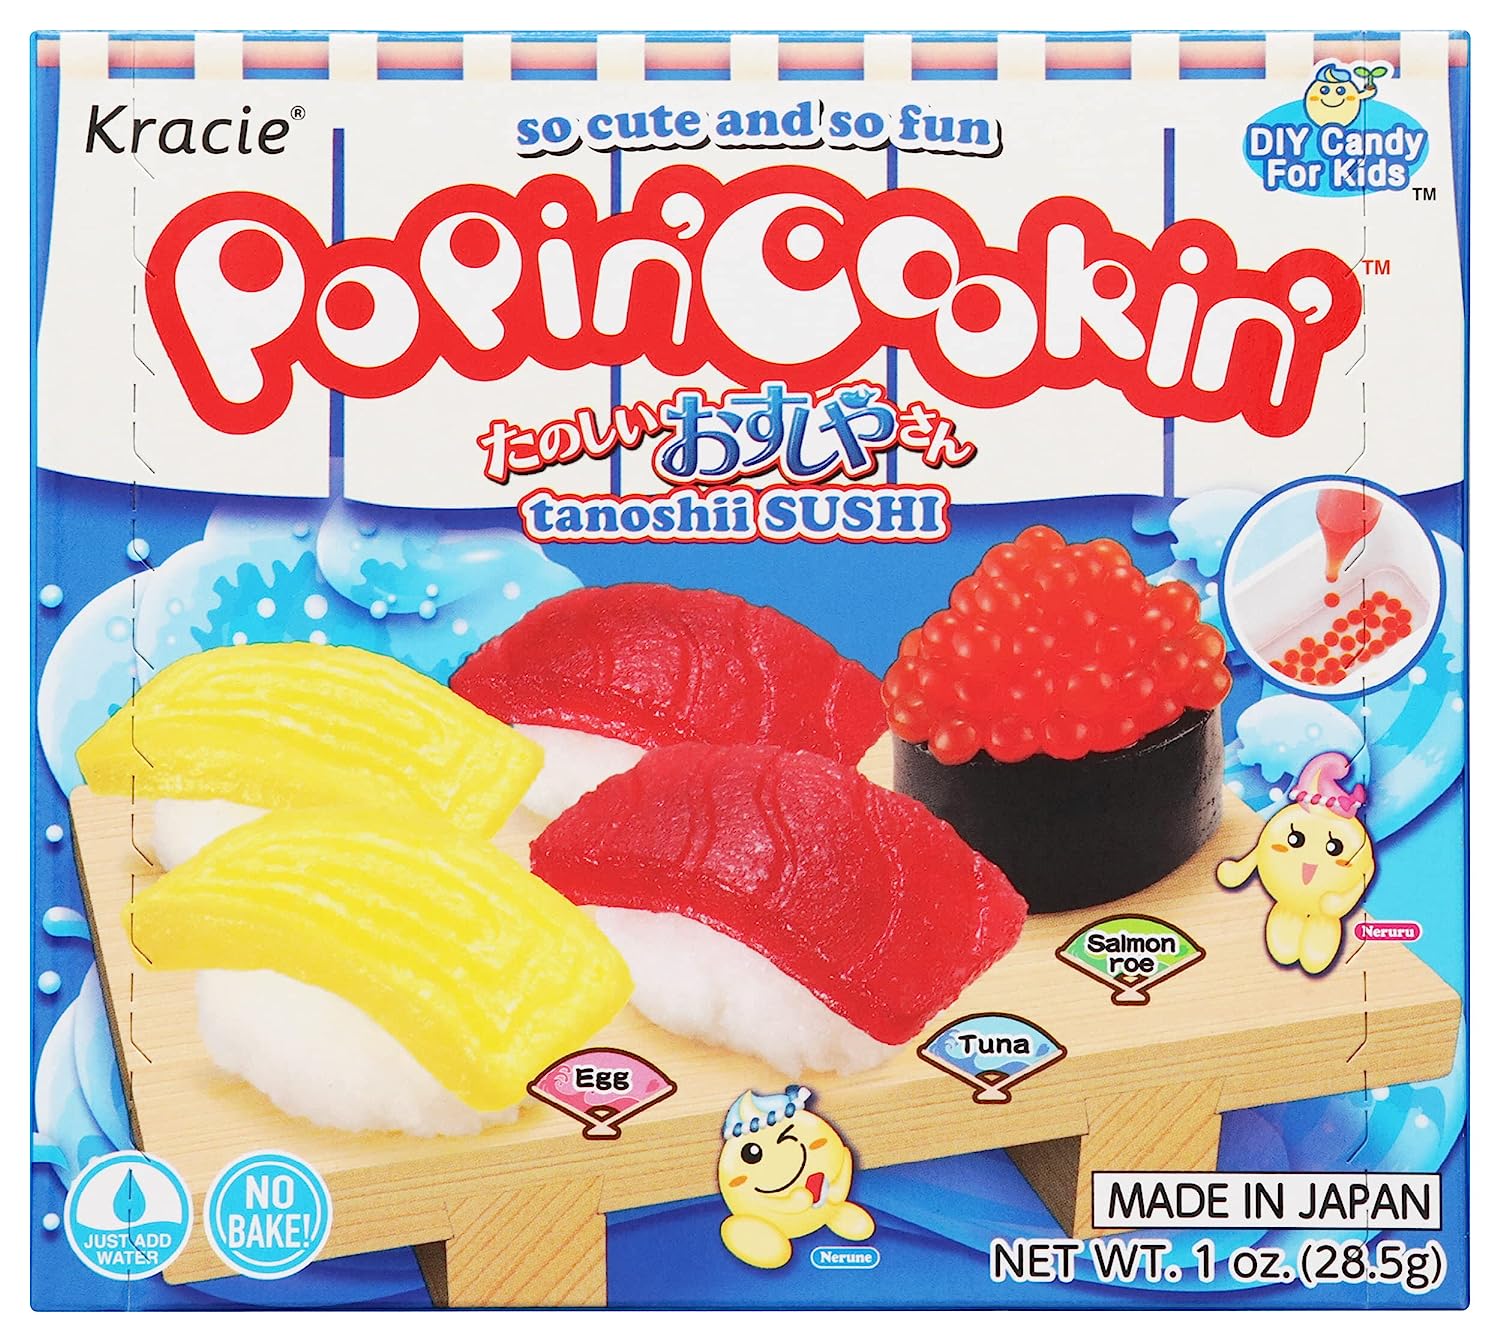 1-Oz Kracie Popin' Cookin' Diy Candy for Kids (Sushi Kit) $3.33 w/ S&S + Free Shipping w/ Prime or on orders over $35